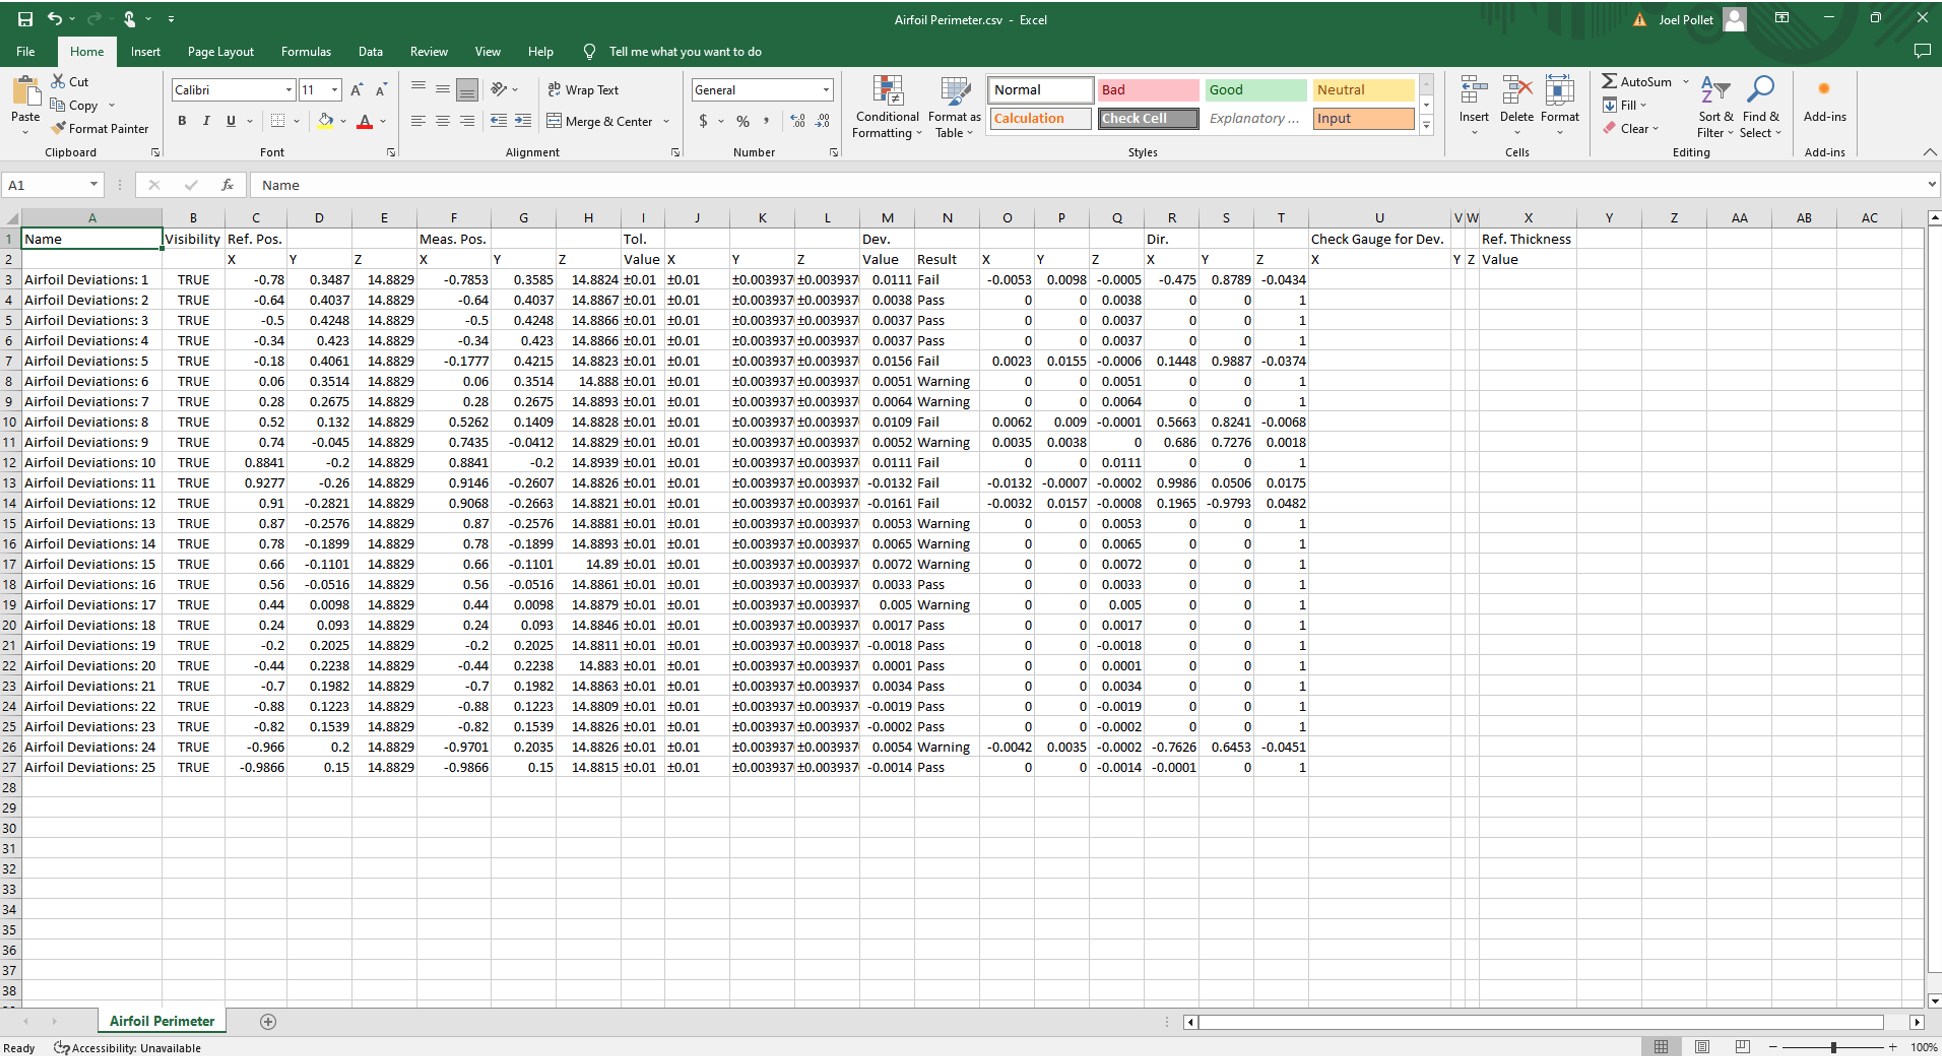 Exporting Control X Data to a Spreadsheet